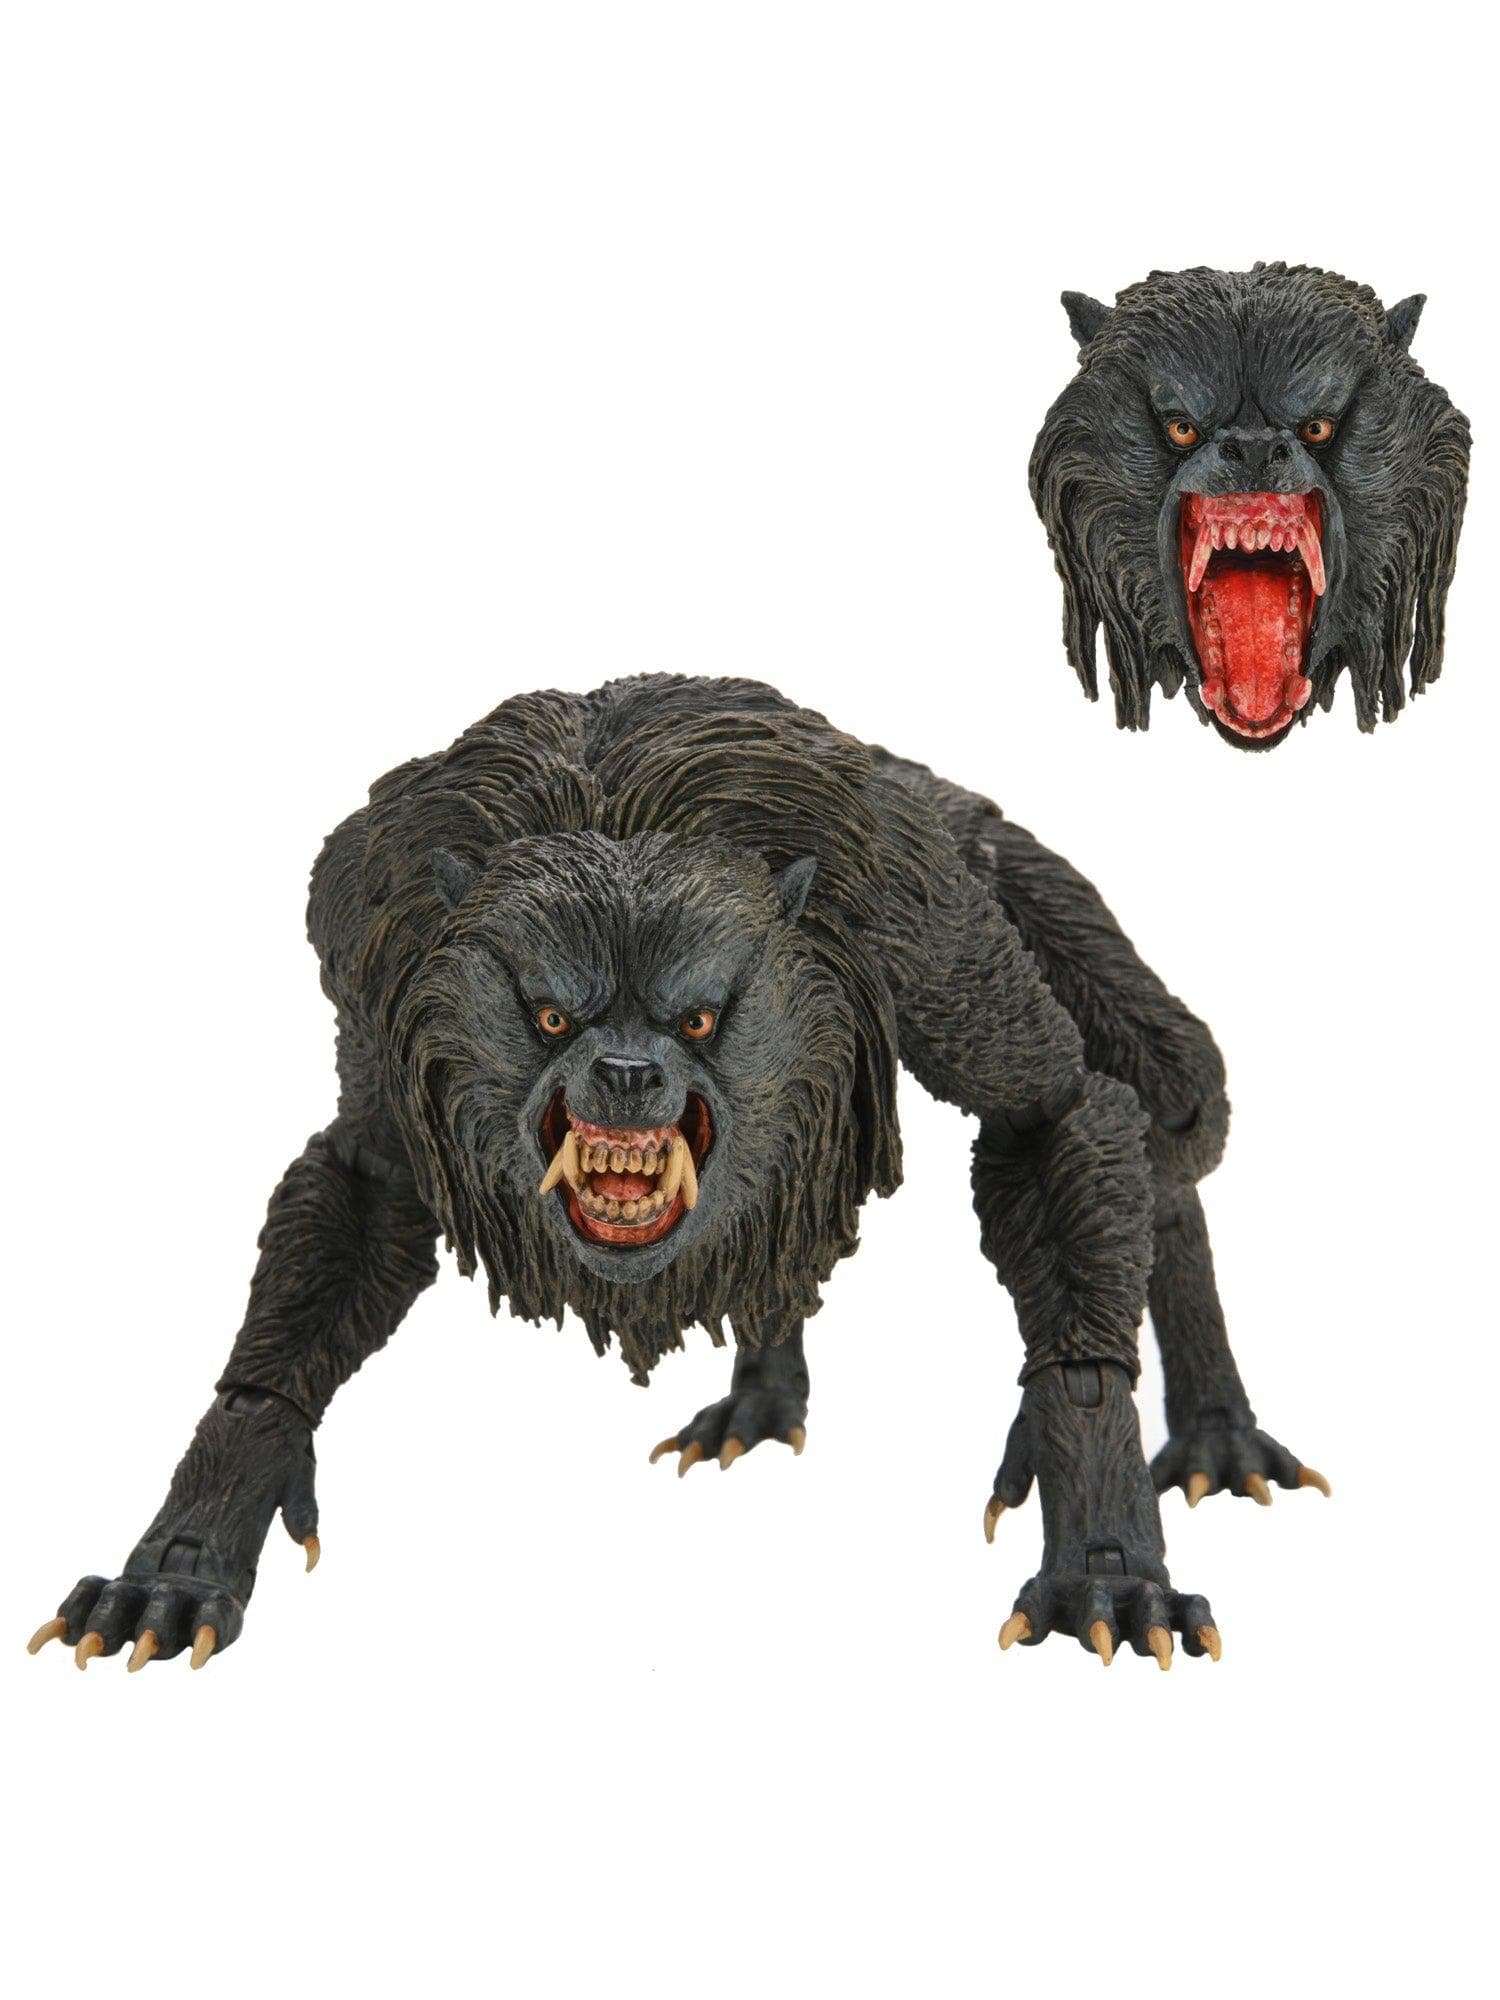 NECA - An American Werewolf in London - 7" Scale Action Figure - Ultimate Kessler Wolf - costumes.com